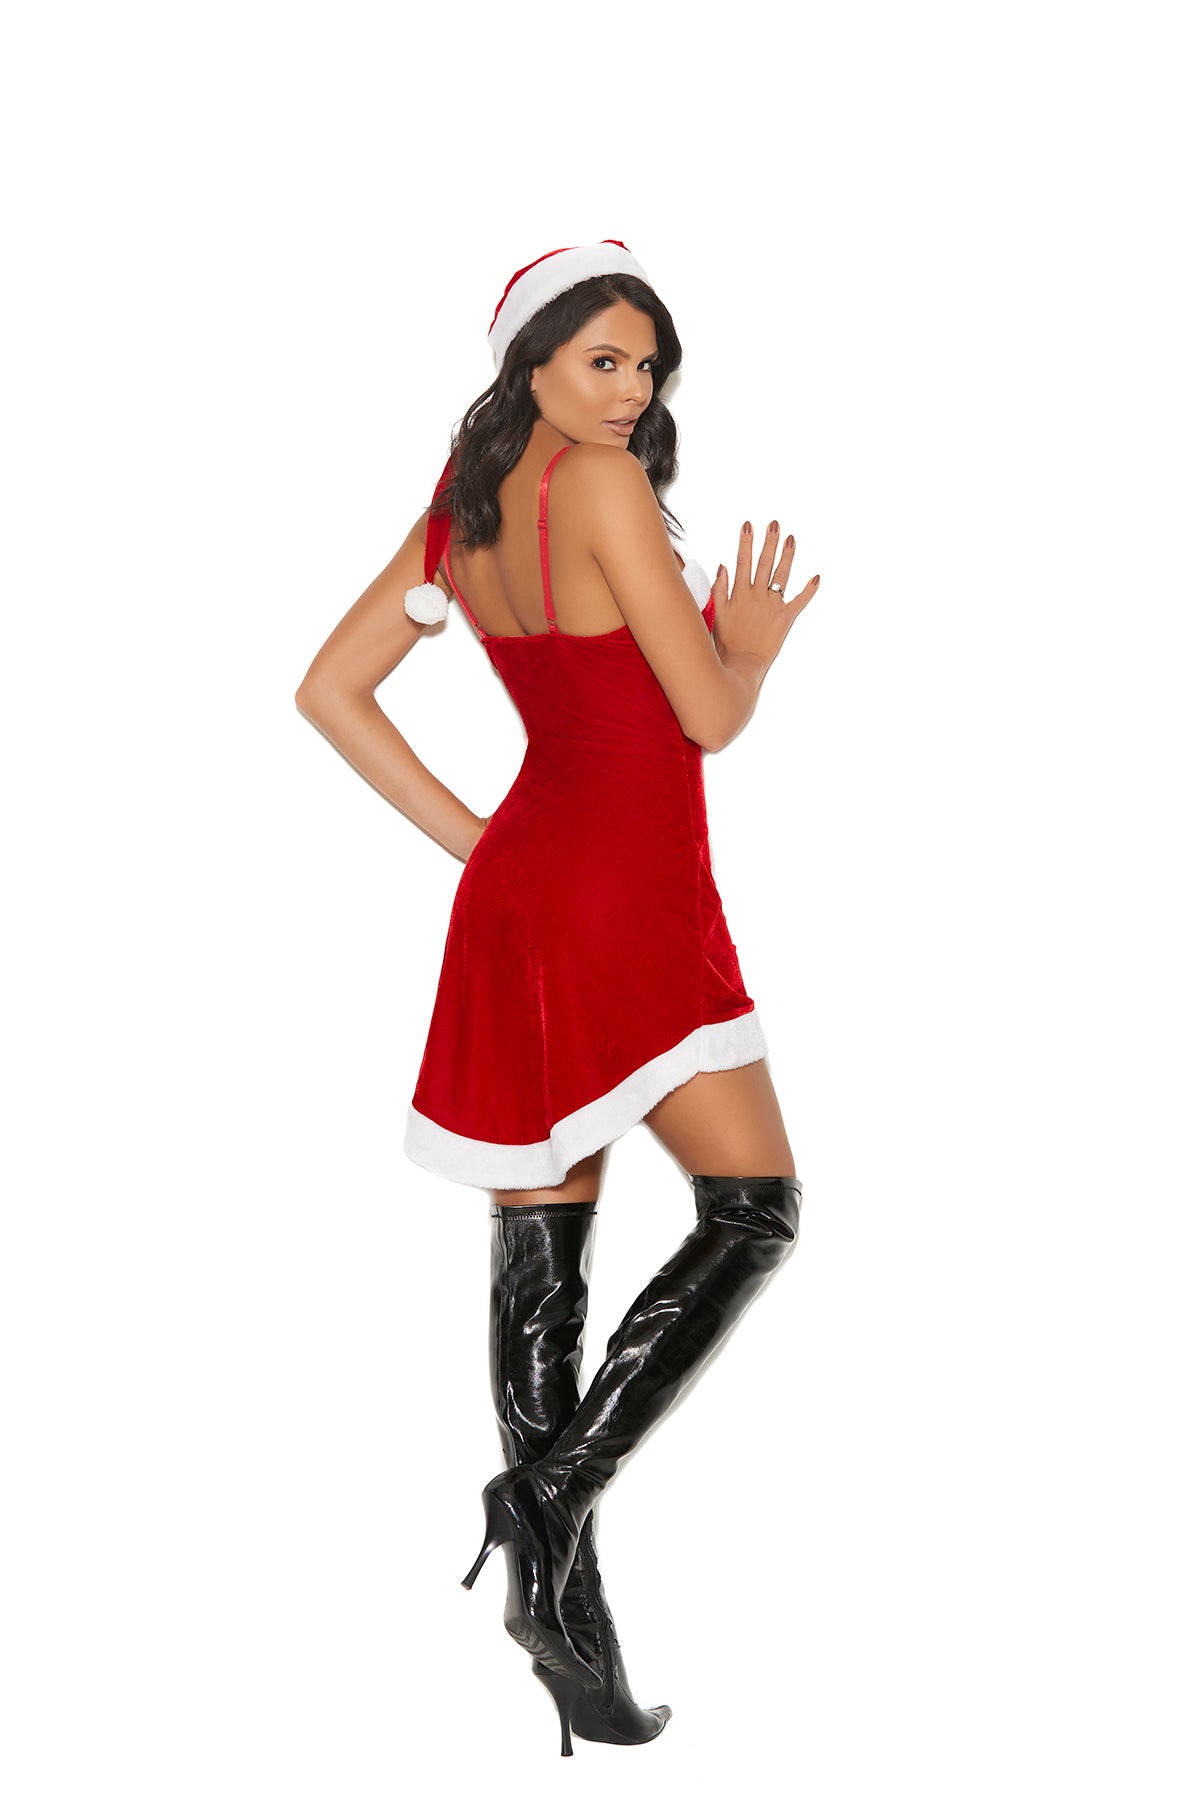 Santas Sweetie - 2 Pc, Costume Includes Velvet Dress With Adjustable Straps And A Hat